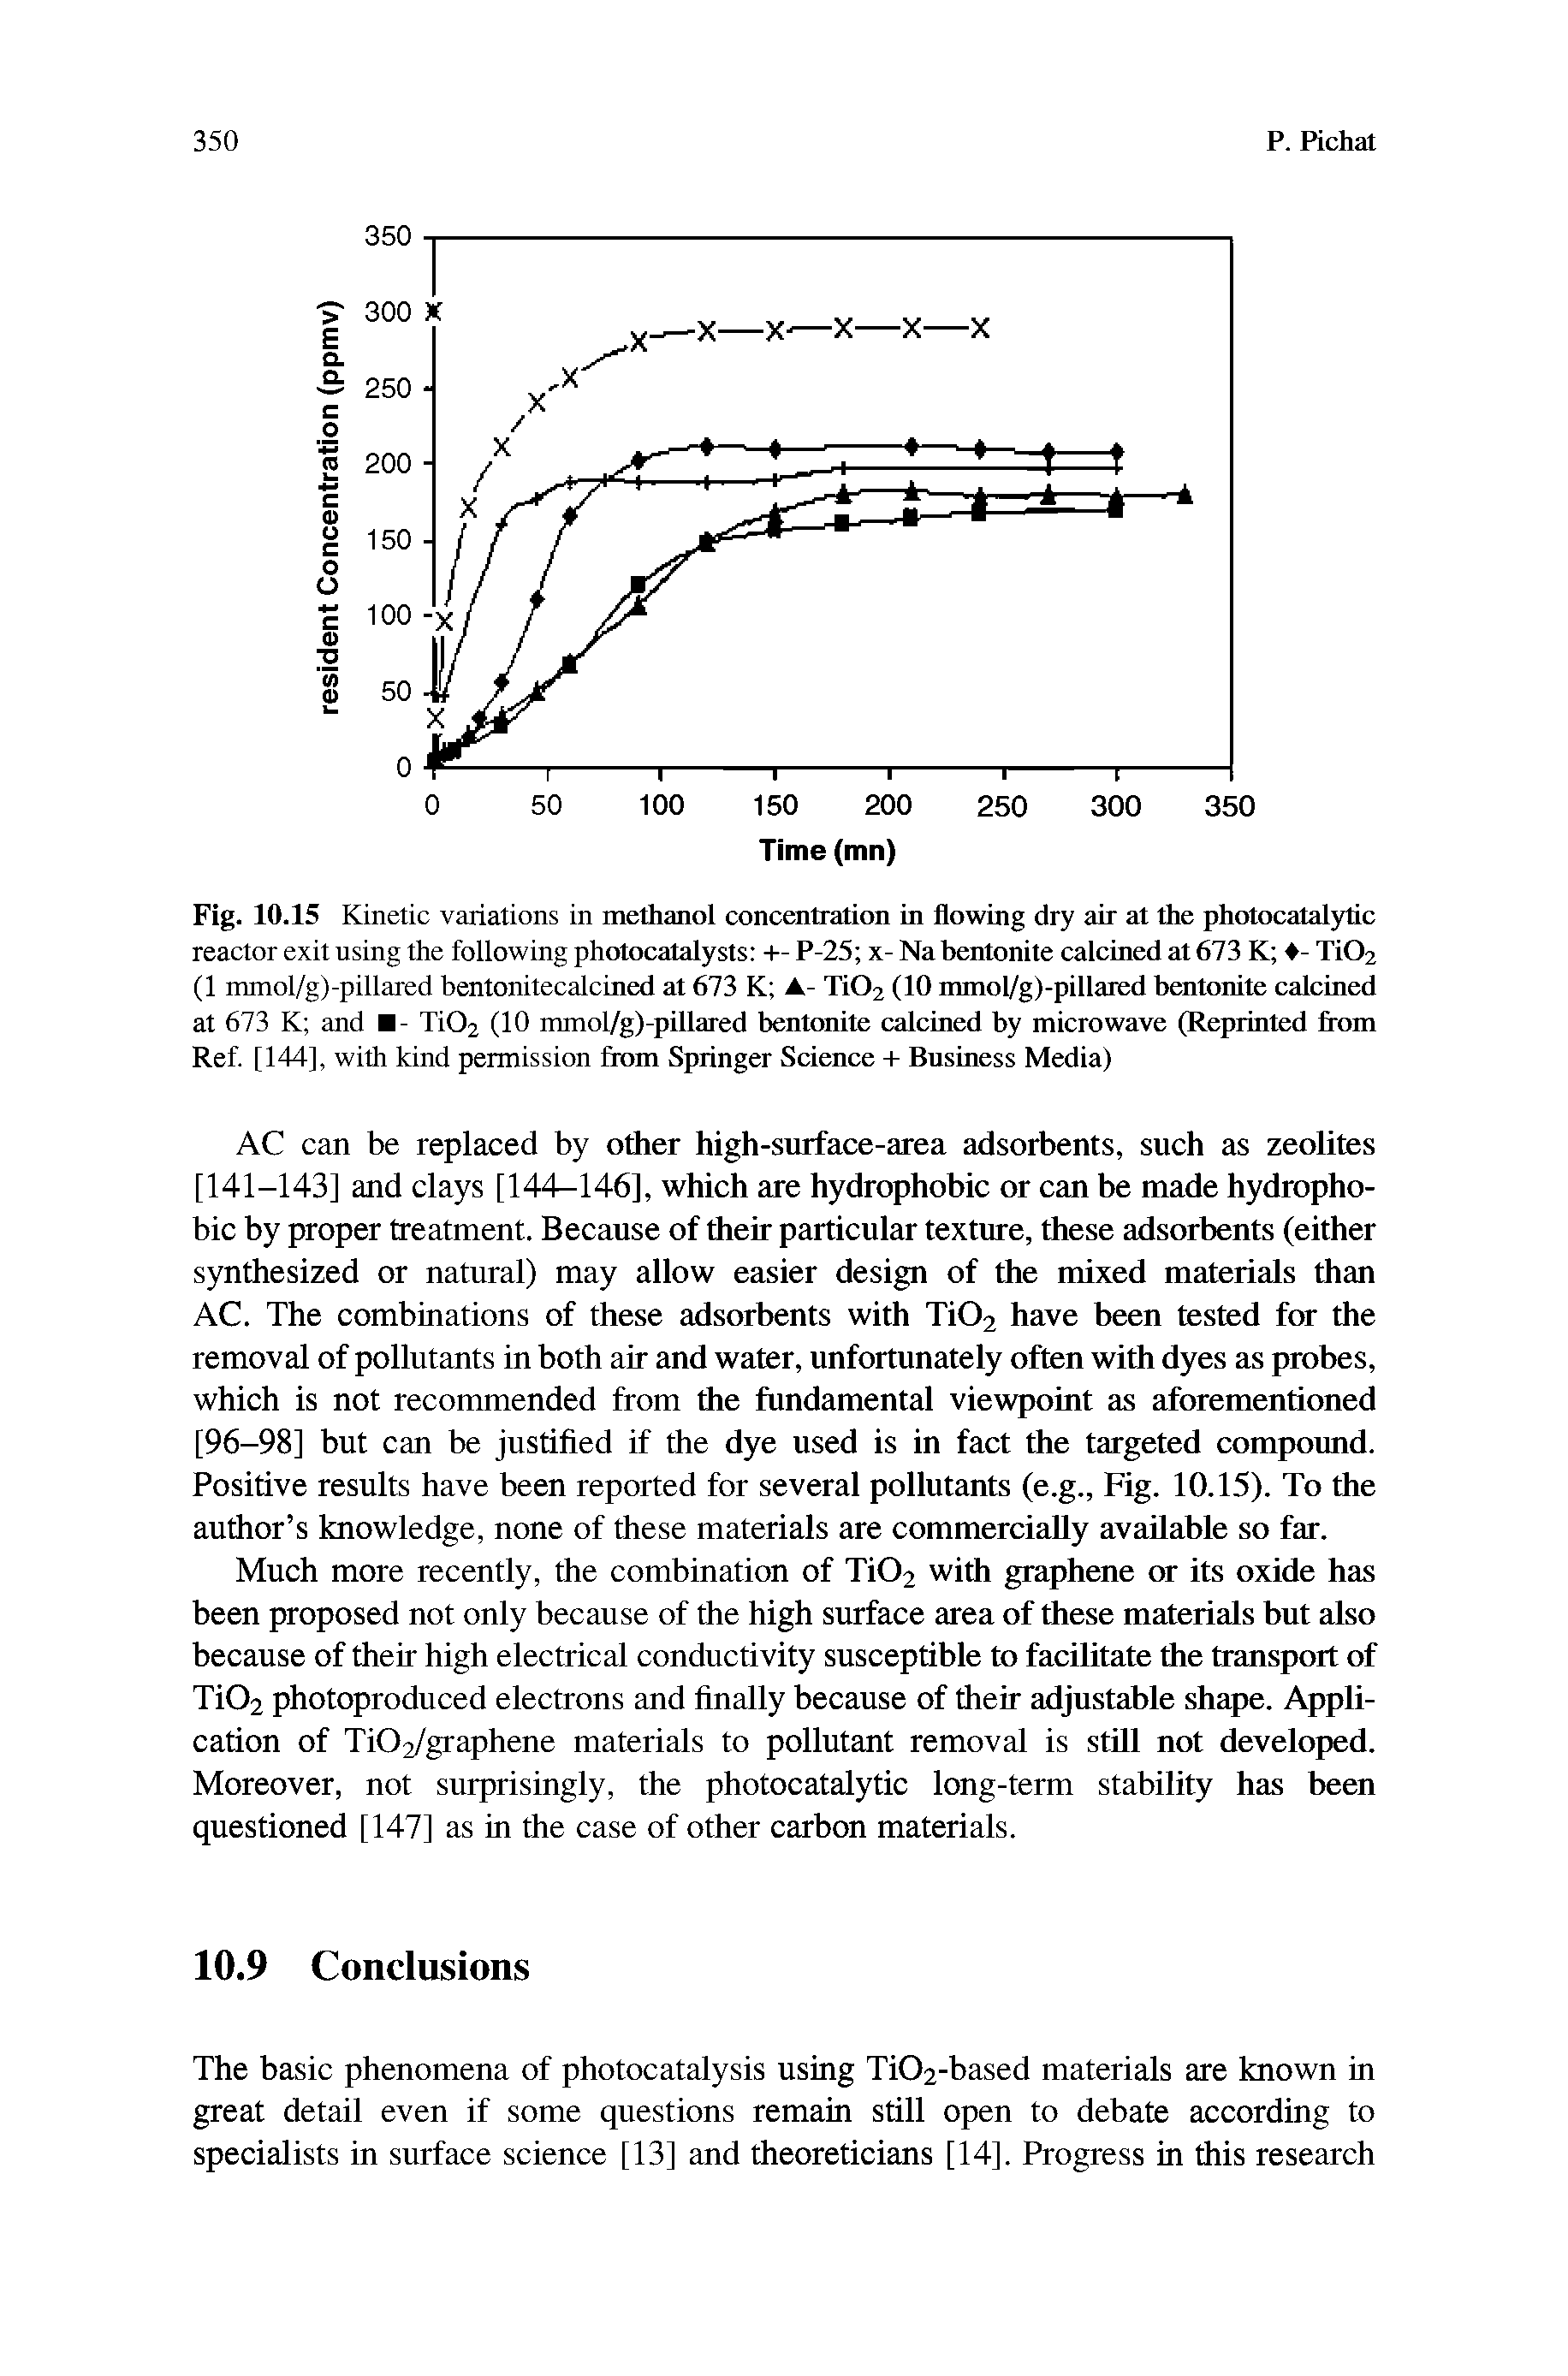 Fig. 10.15 Kinetic variations in methanol concentration in flowing dry air at the photocatalytic reactor exit using the following photocatalysts +- P-25 x- Na bentonite caleined at 673 K - Ti02 (1 mmol/g)-pillared bentonitecalcined at 673 K A- Ti02 (10 mmol/g)-pillared bentonite calcined at 673 K and - Ti02 (10 mmol/g)-pillared bentonite calcined by microwave (Reprinted from Ref. [144], with kind permission from Springer Science + Business Media)...